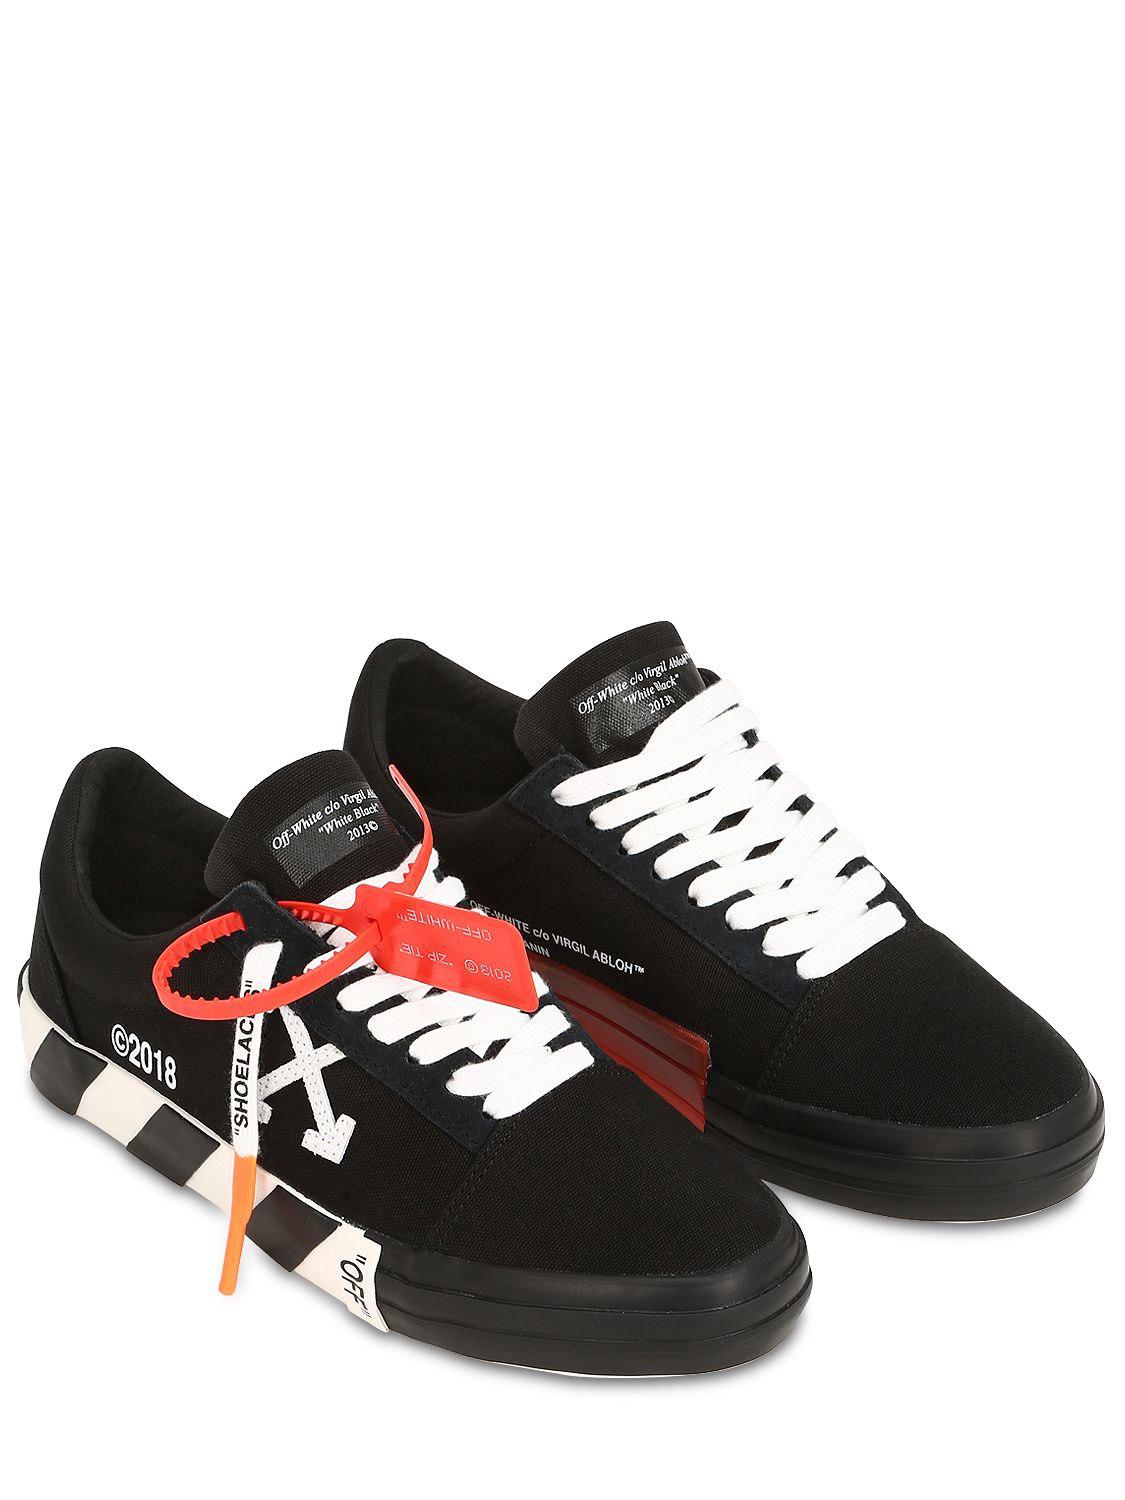 Off-White c/o Virgil Abloh Cotton Canvas Sneakers W/ Stripes in Black ...